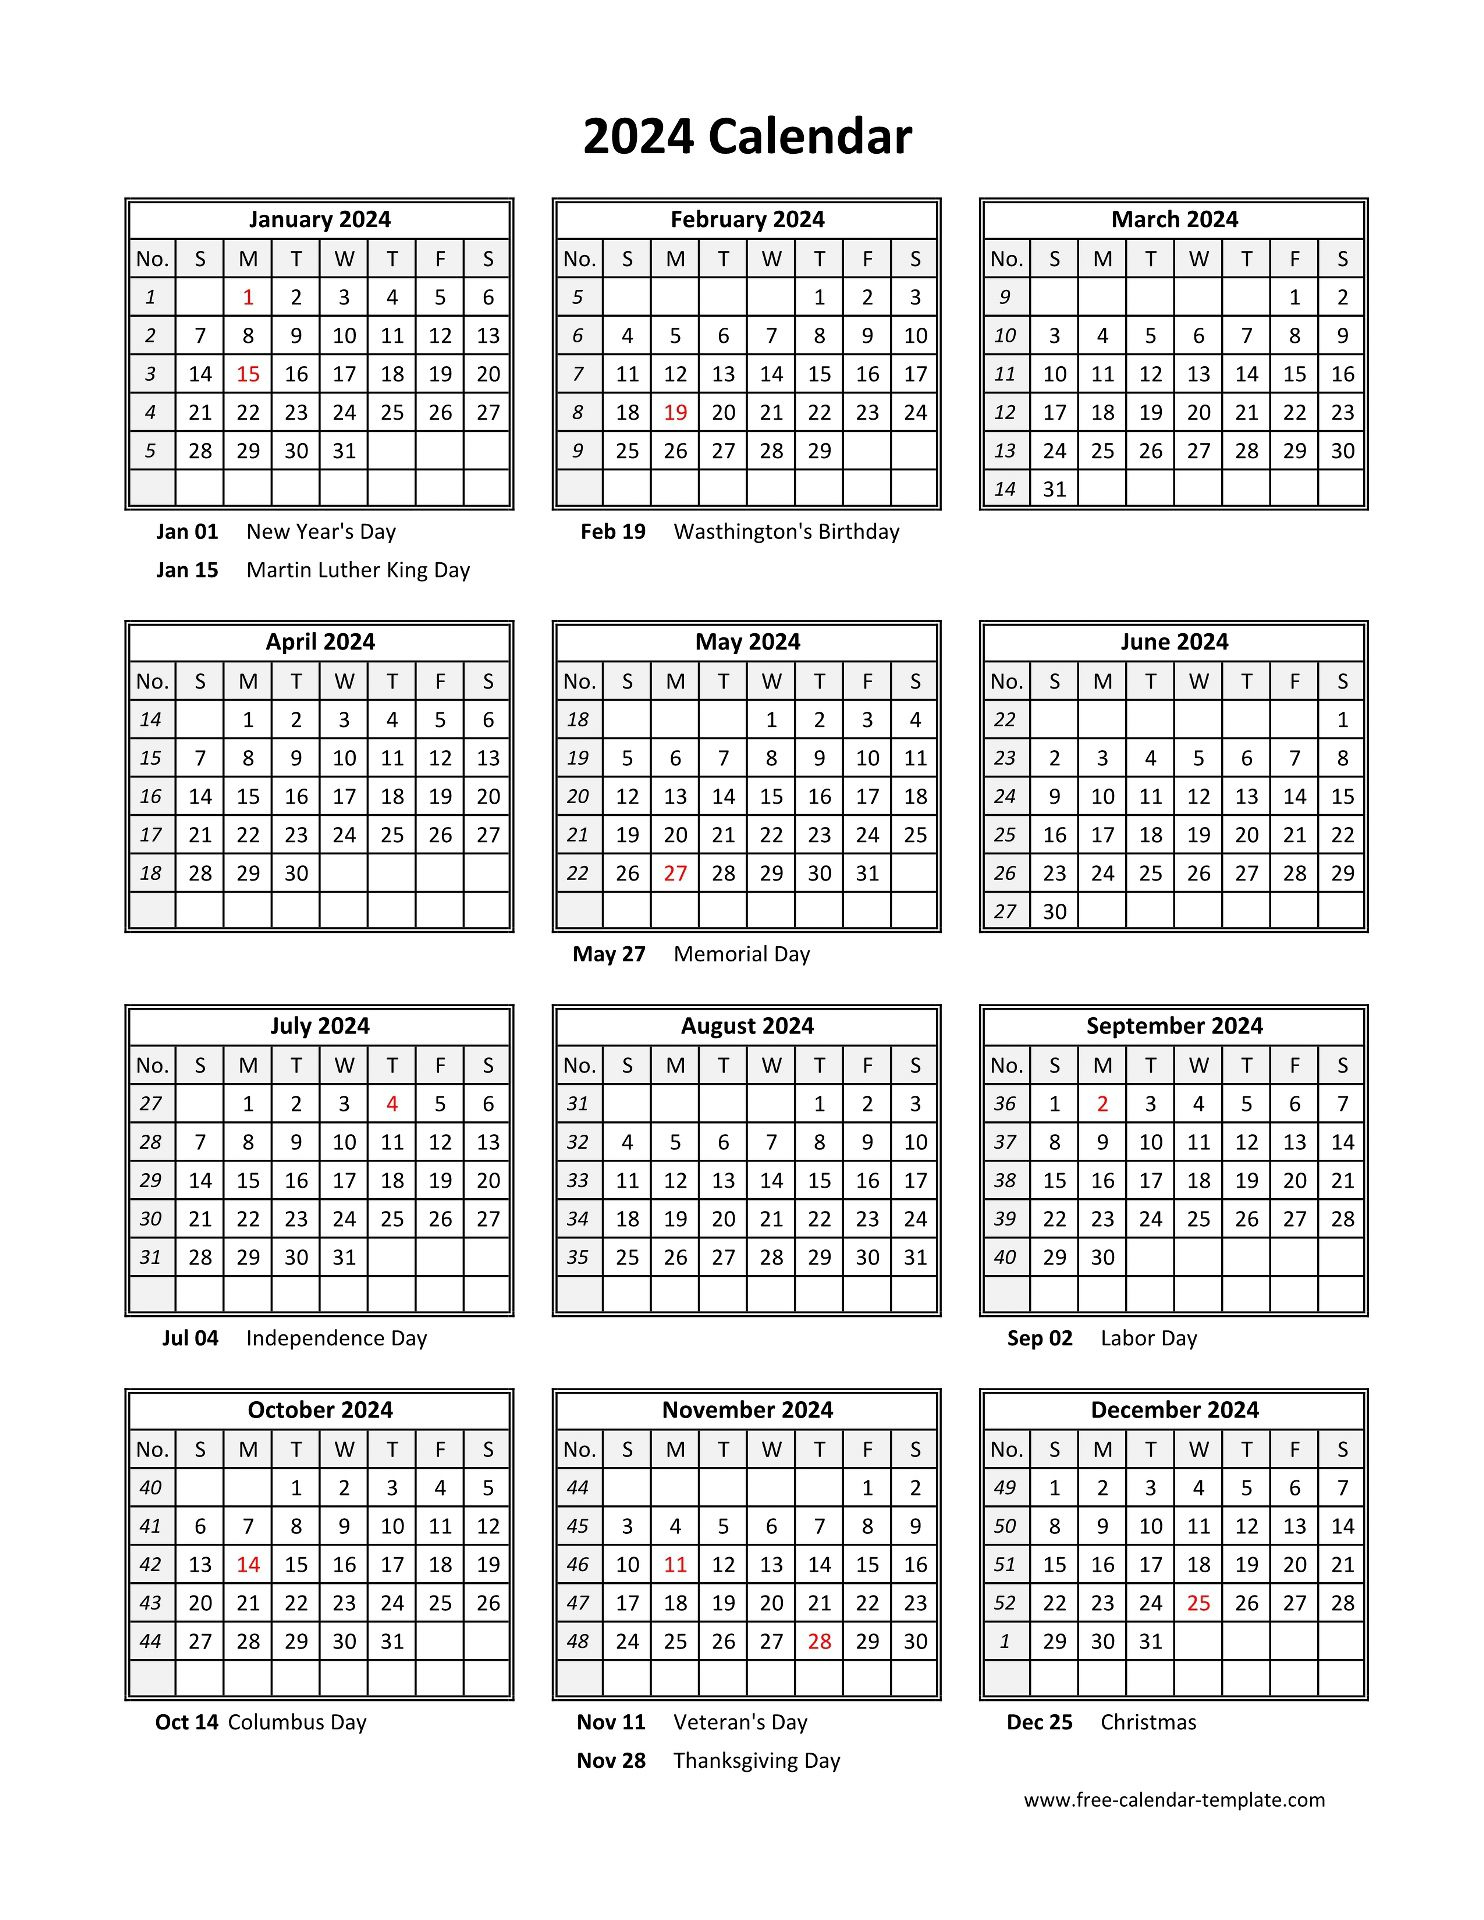 Yearly Printable Calendar 2024 With Holidays | Free-Calendar | Free Printable Calendar 2024 Without Download